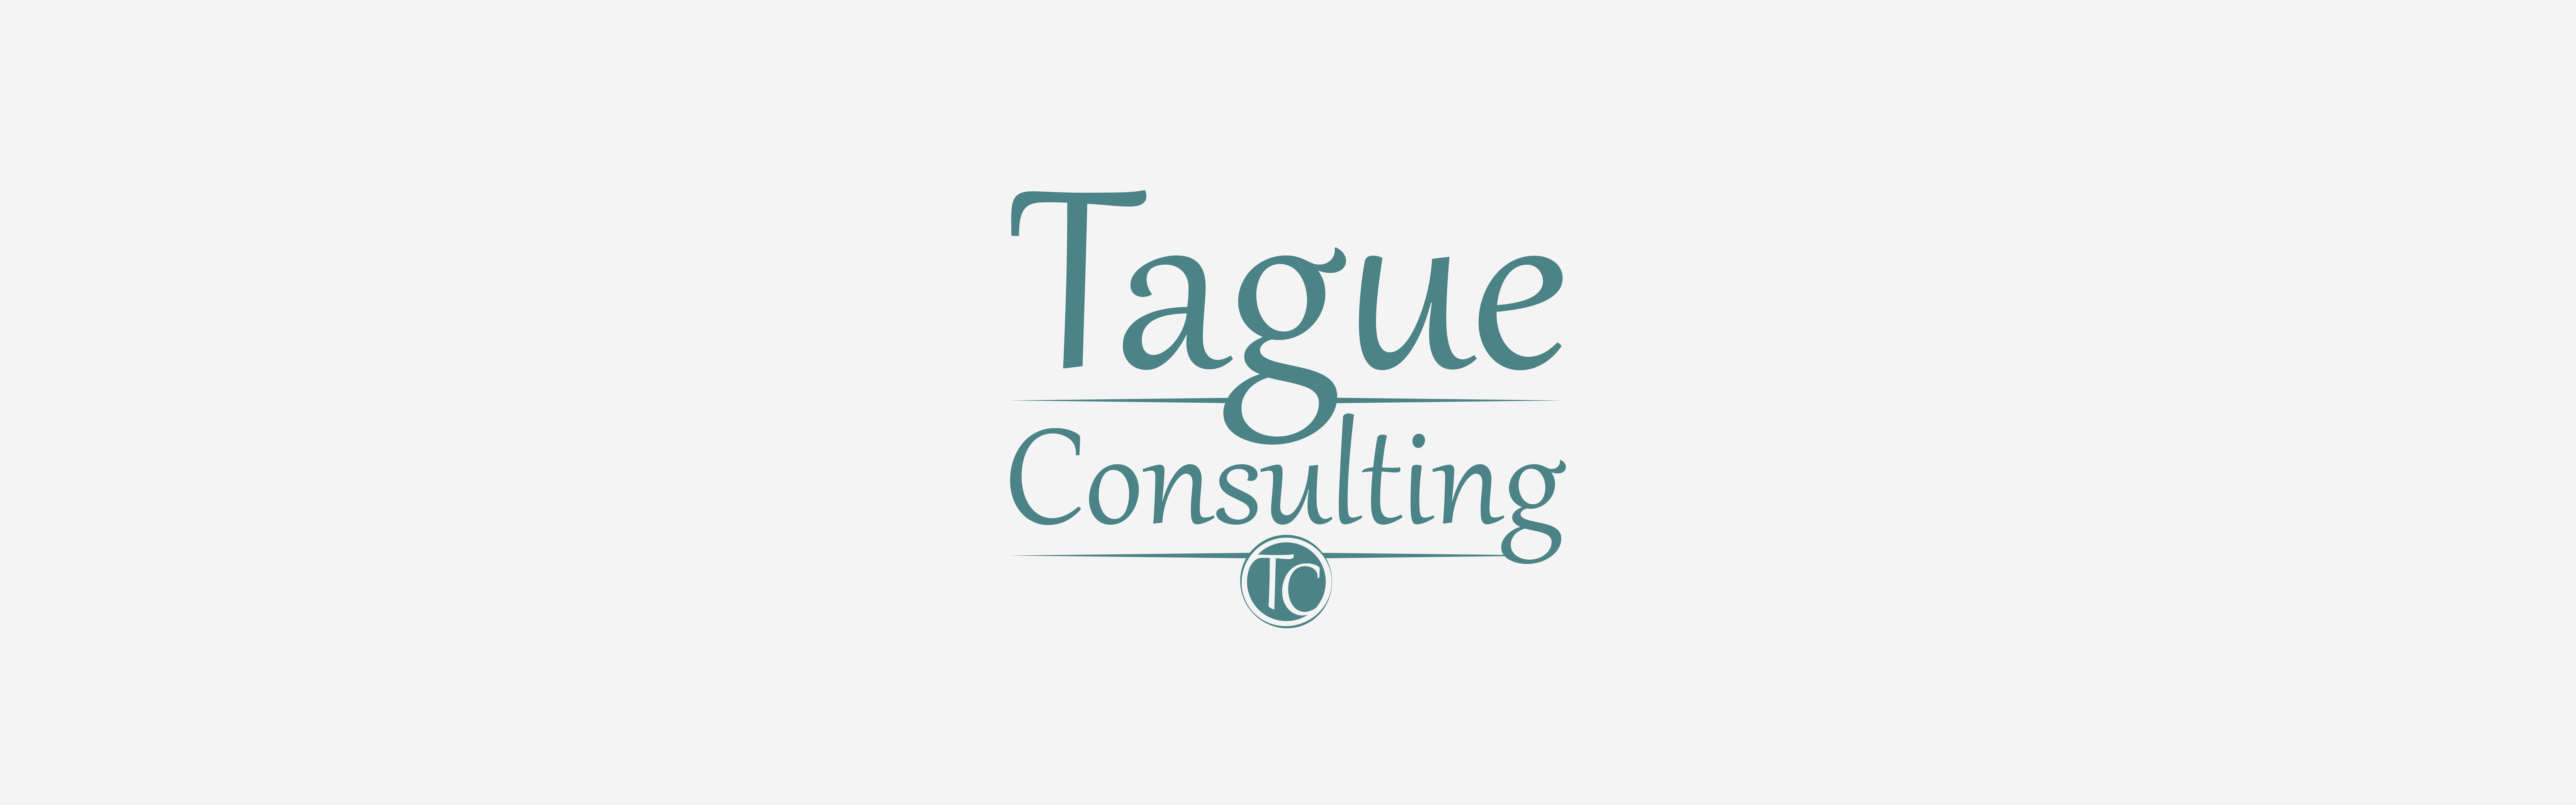 The image displays the logo for "Tague Consulting" with stylized lettering, predominantly in teal color, with a small circular emblem beneath the text that appears to incorporate the letters "T" and